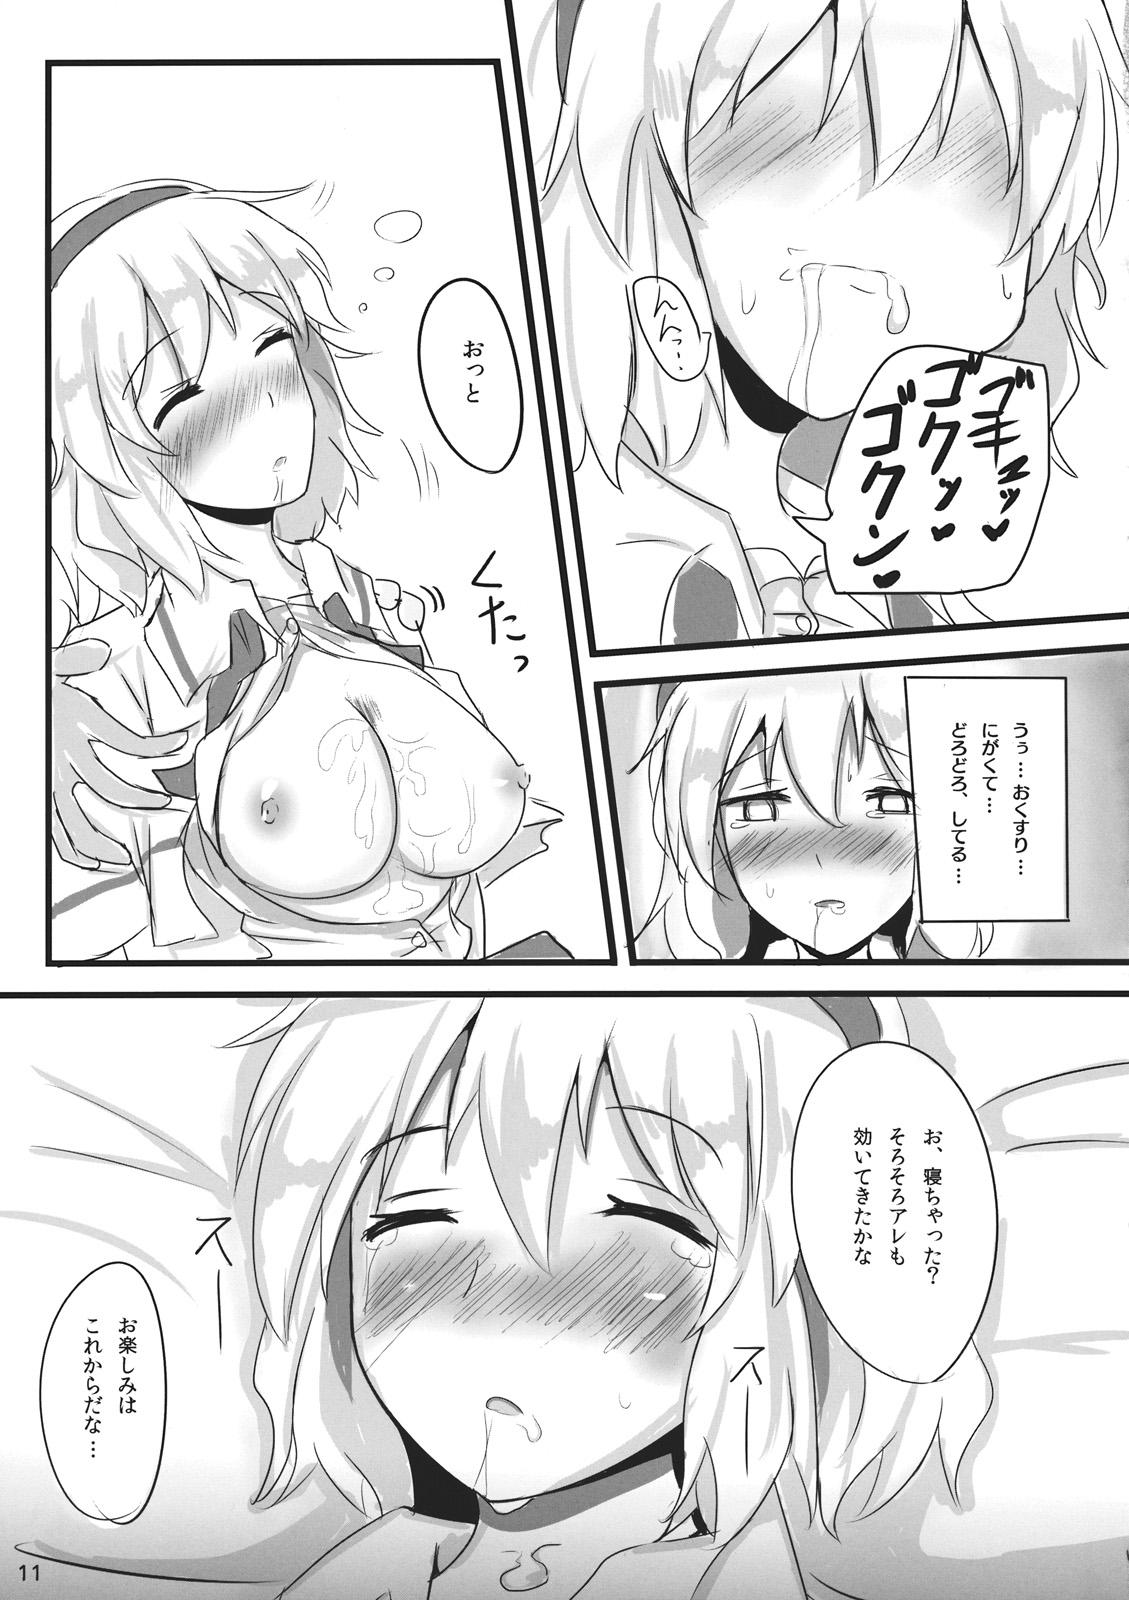 18 Year Old Porn Nanairo Syndrome - Touhou project Cbt - Page 11